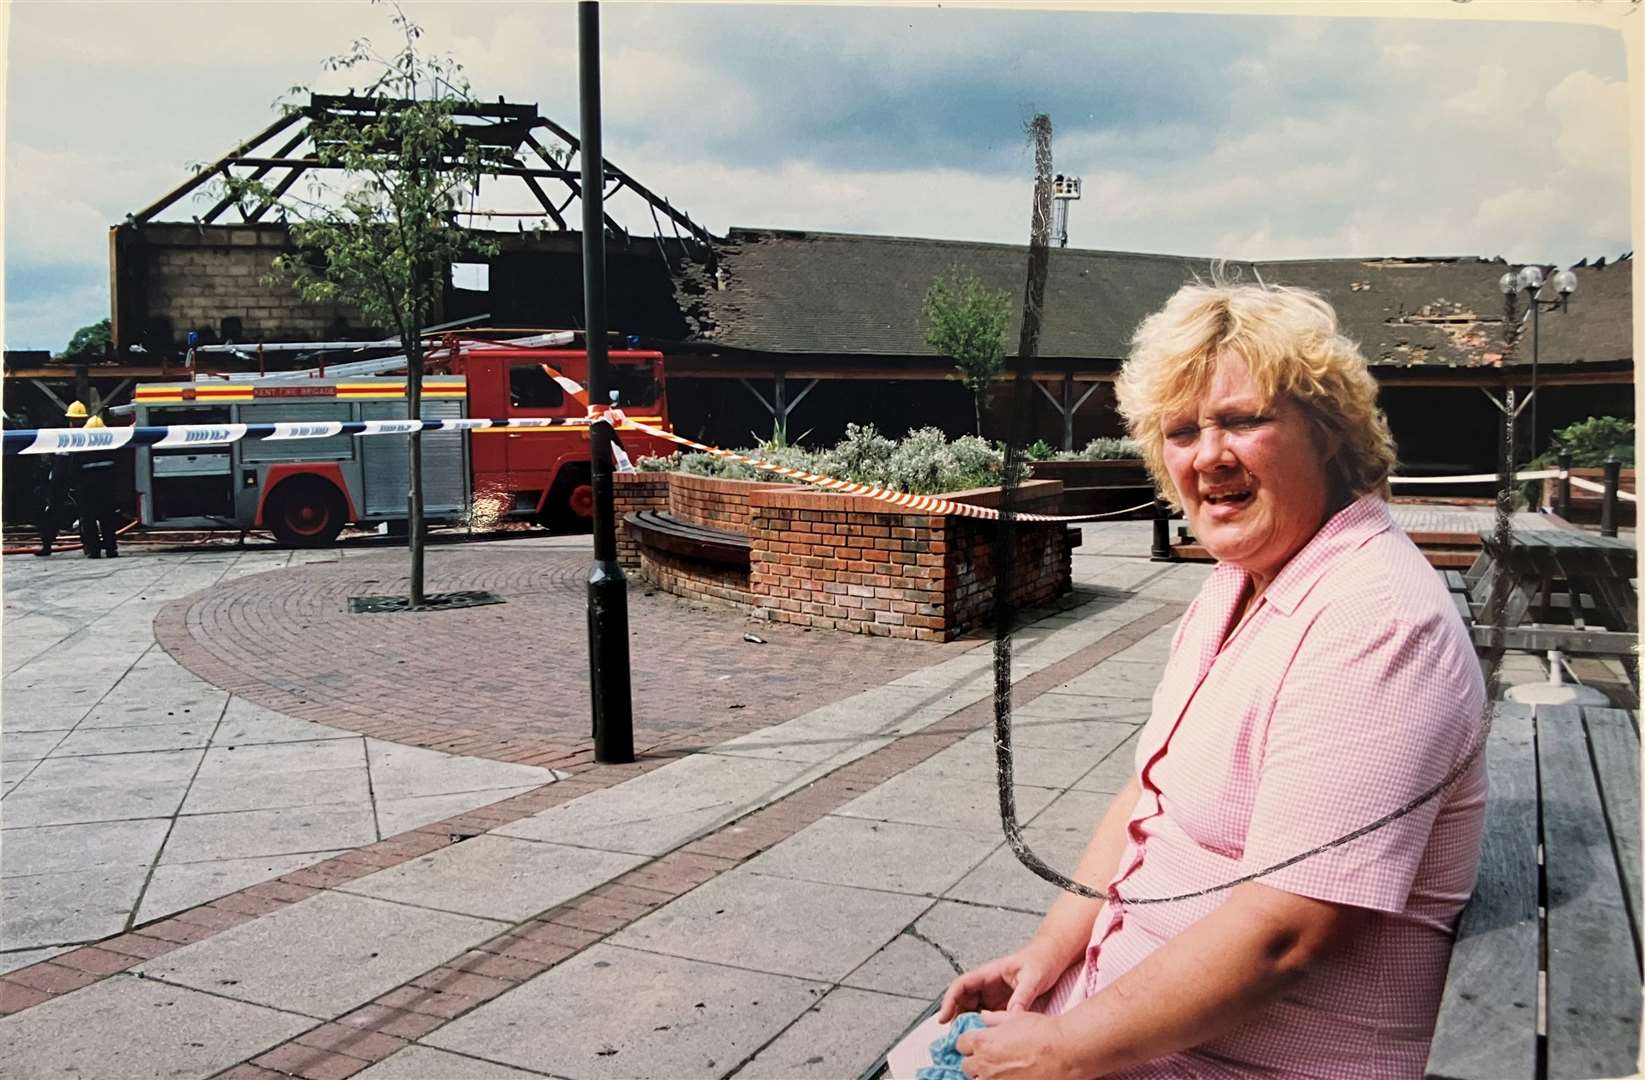 Jean Reed described how the flames threatened to spread to her pub, the Early Bird, at the height of the blaze